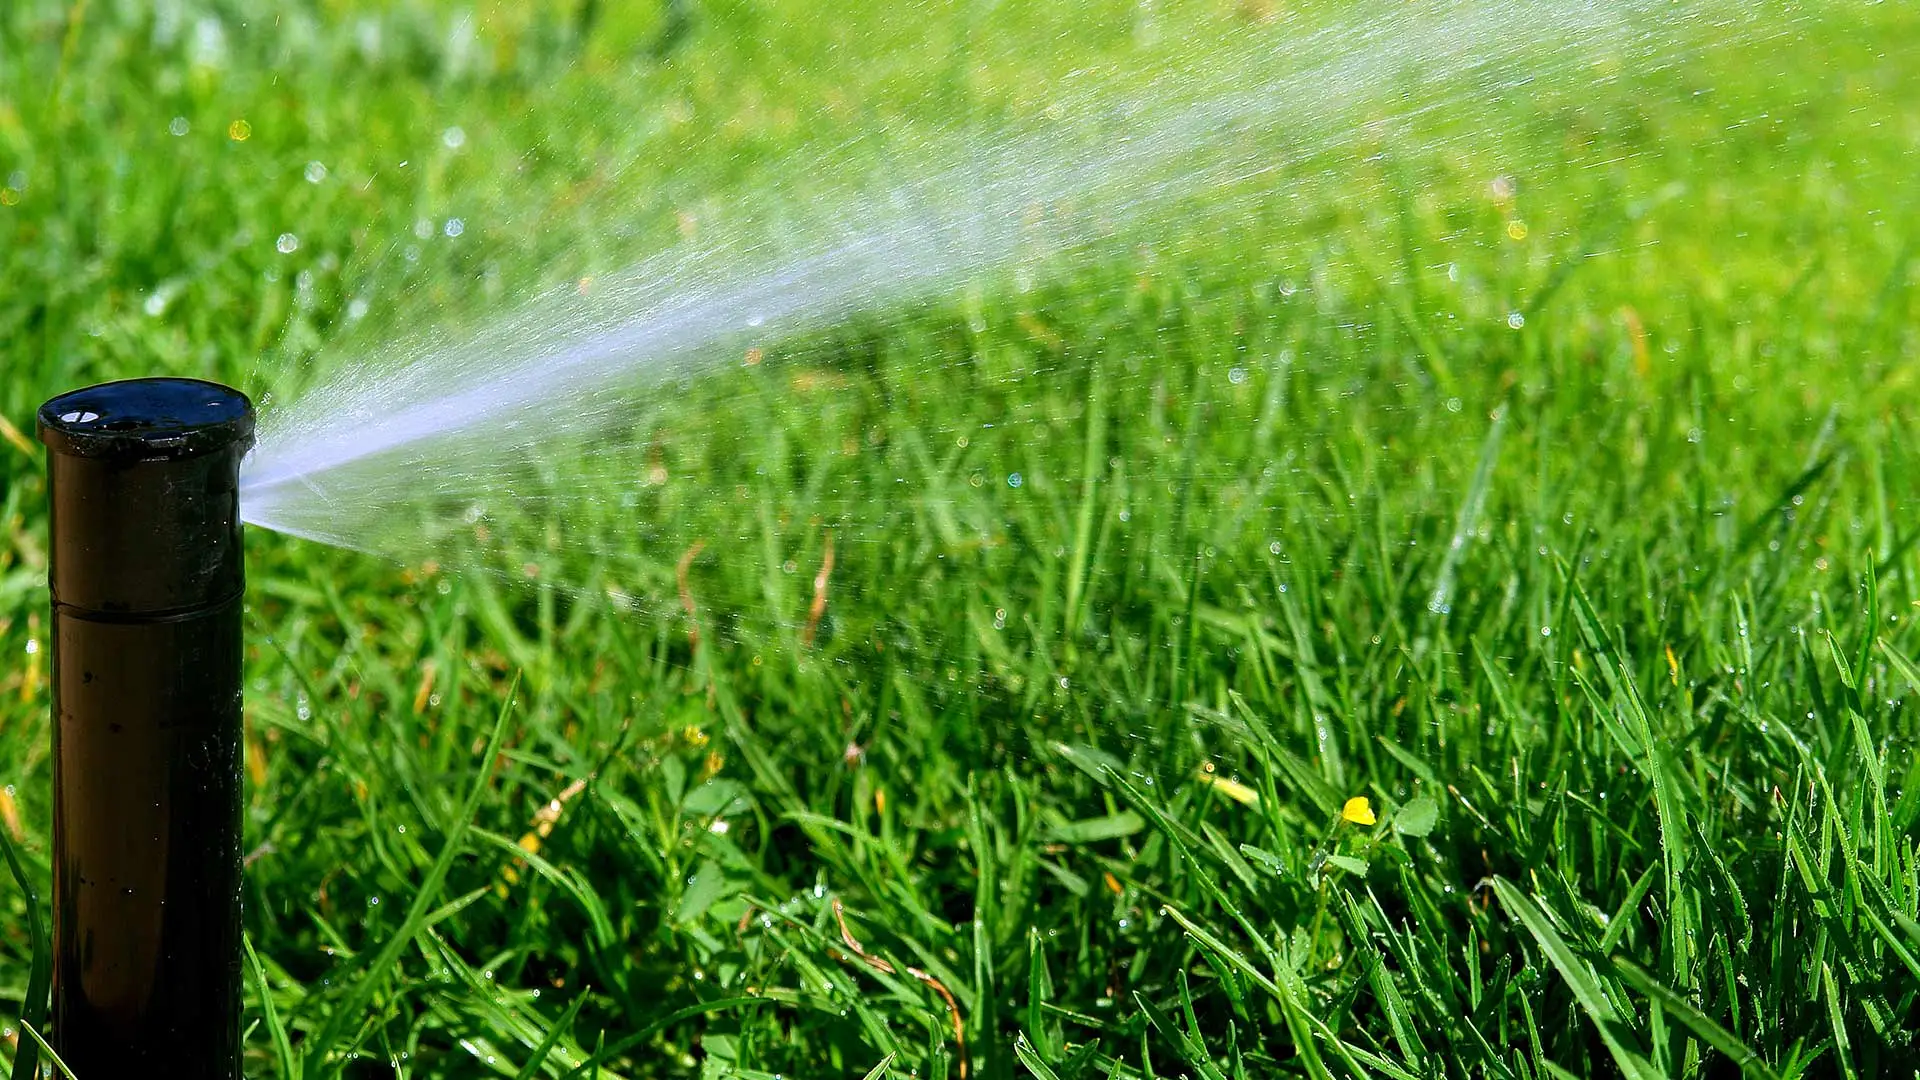 4 Things to Look for When Hiring a Company to Repair Your Irrigation System